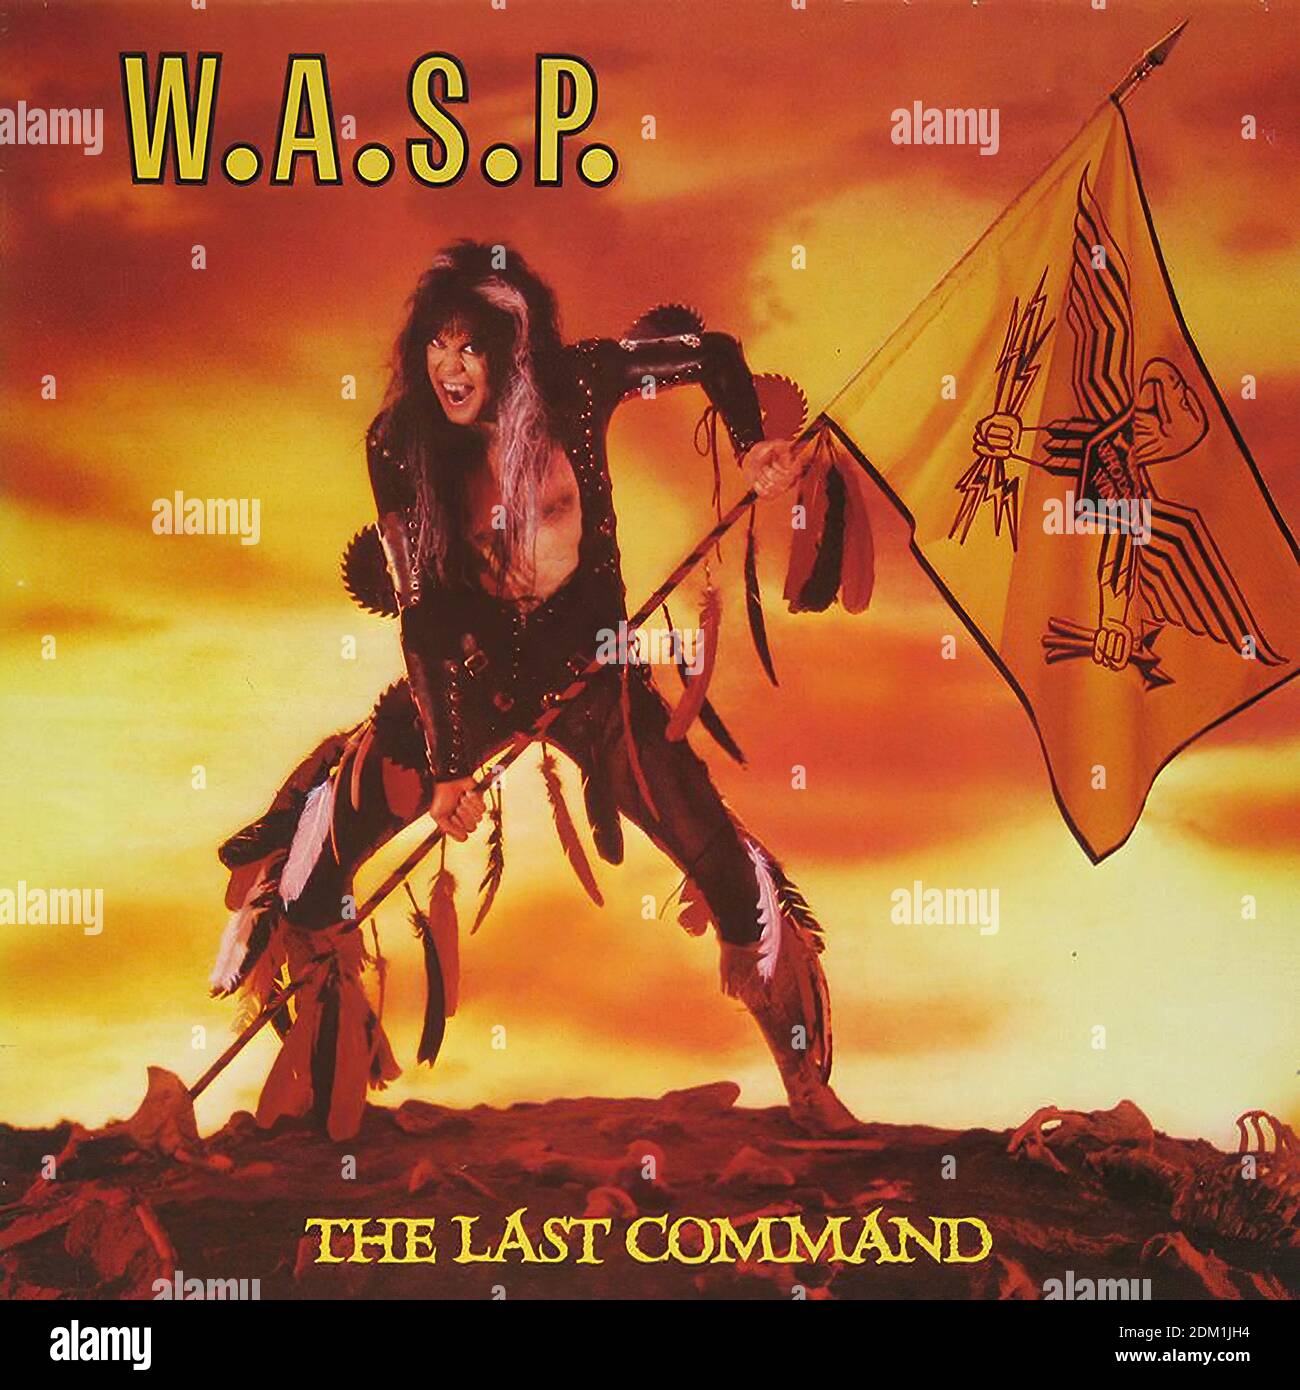 W.A.S.P.  The Last Command FranCe  - Vintage Vinyl Record Cover Stock Photo